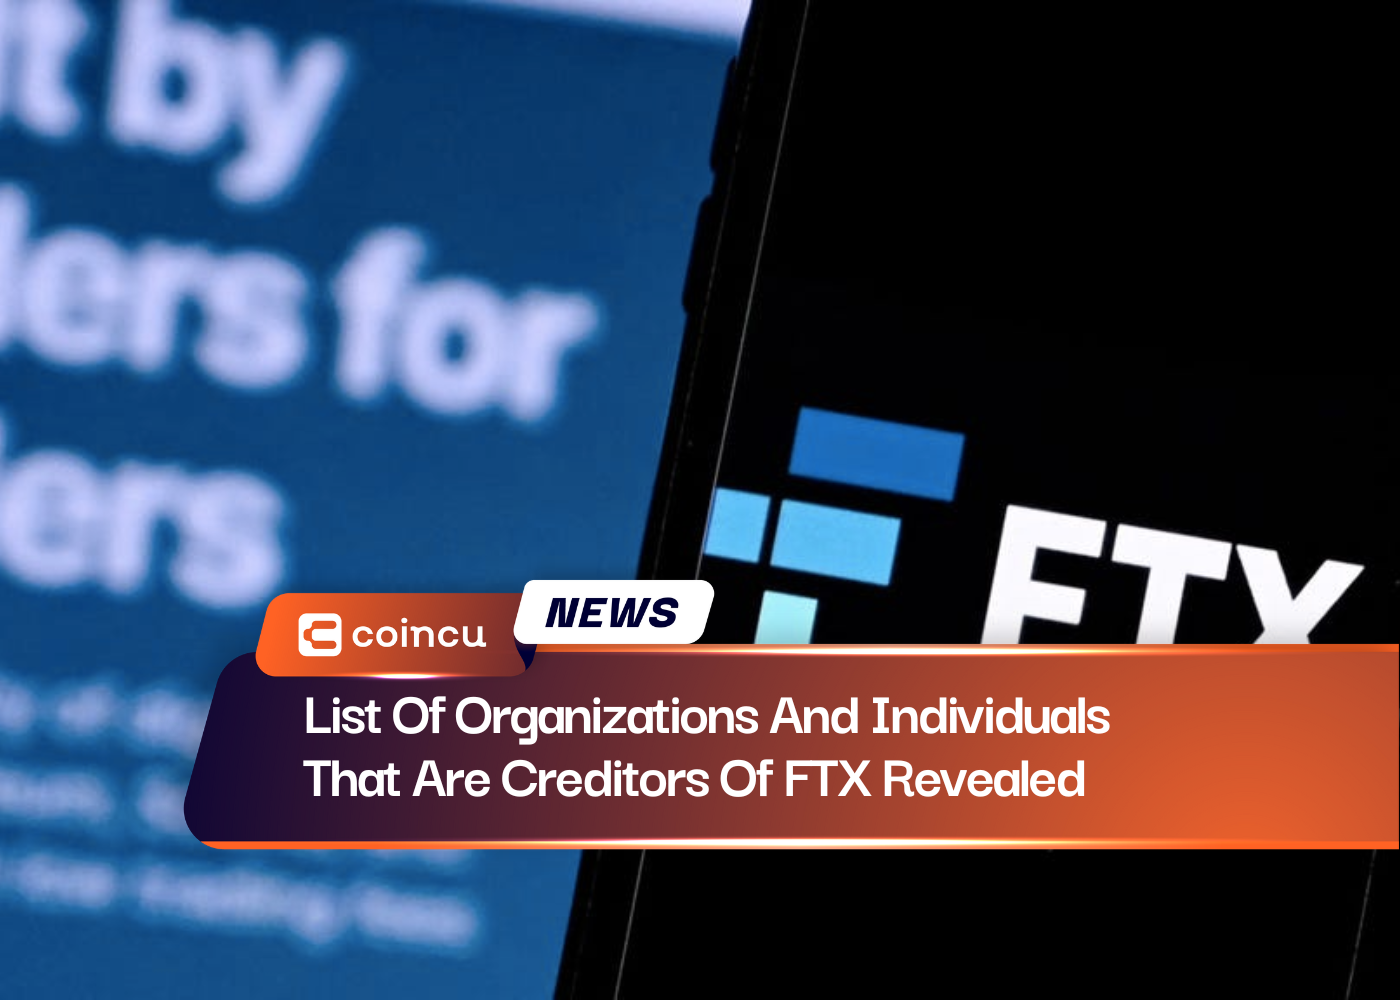 List Of Organizations And Individuals That Are Creditors Of FTX Revealed